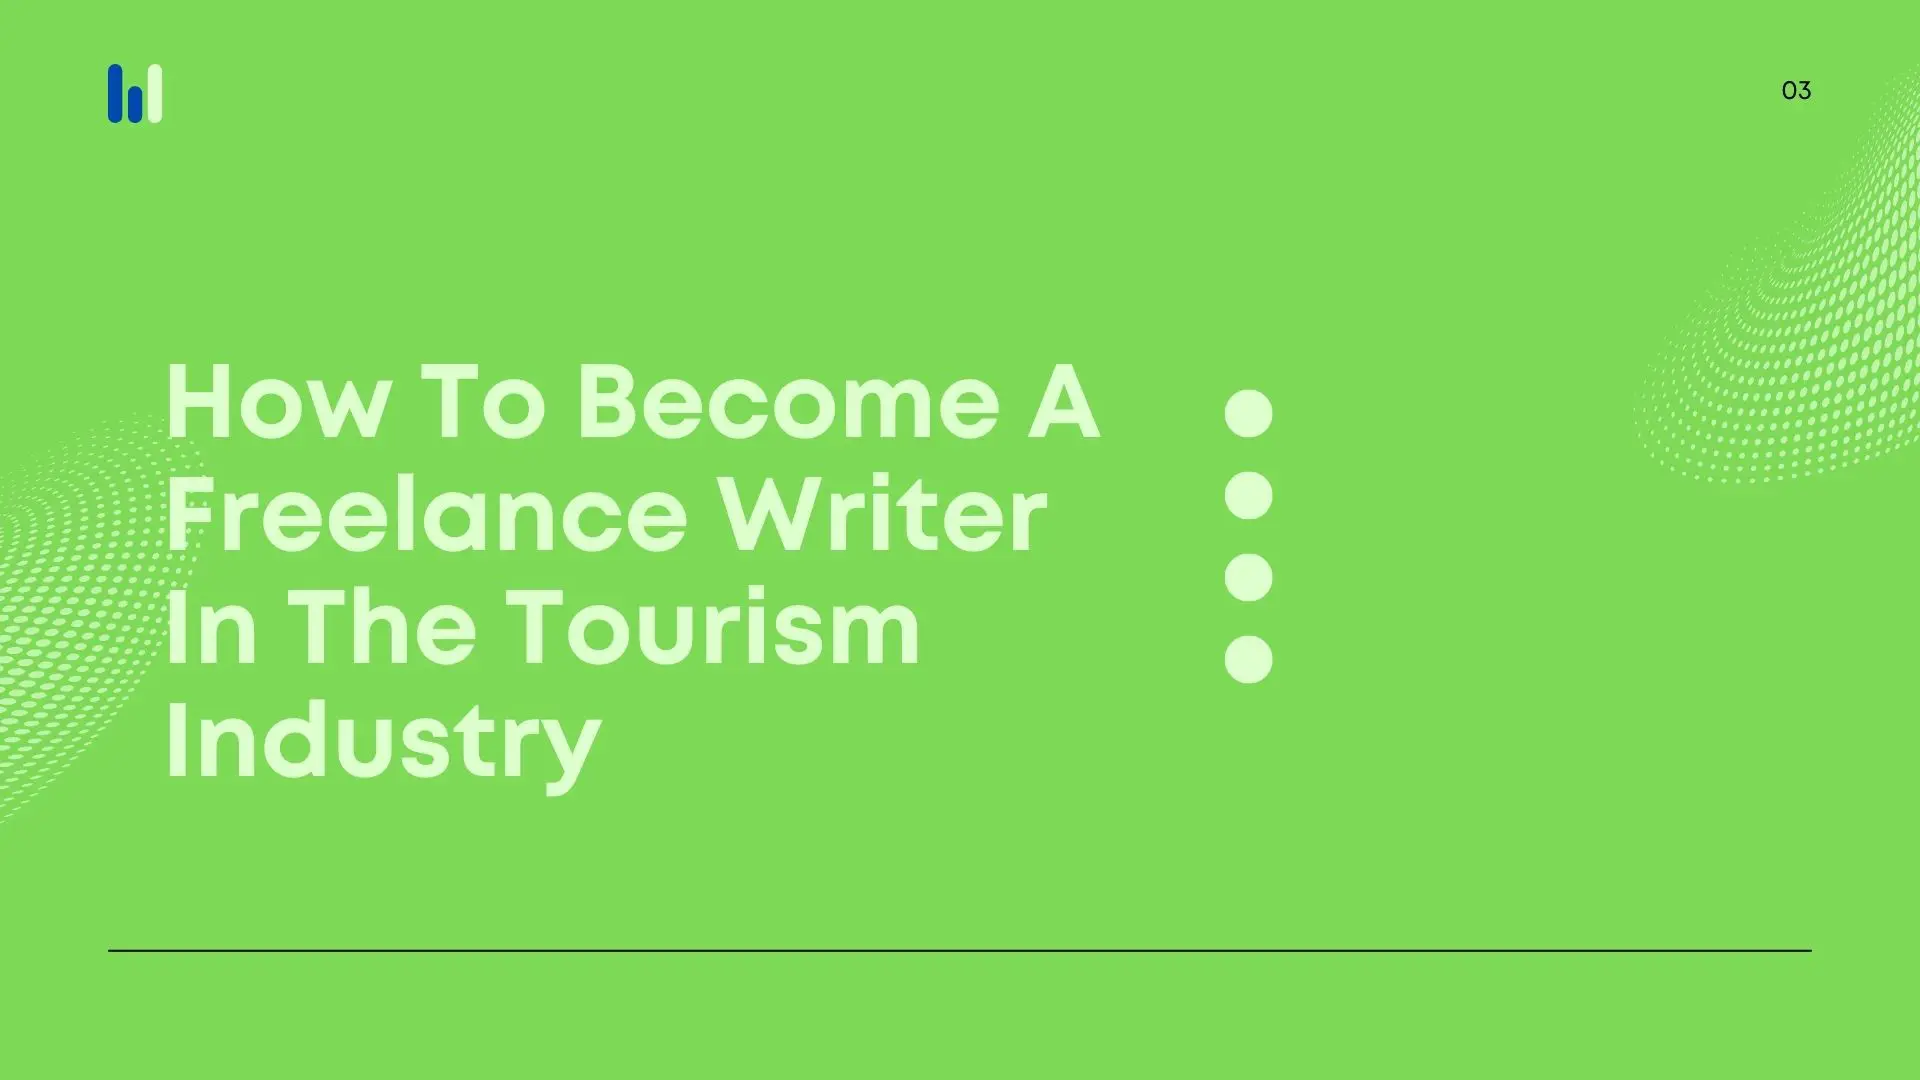 How To Become A Freelance Writer In The Tourism Industry